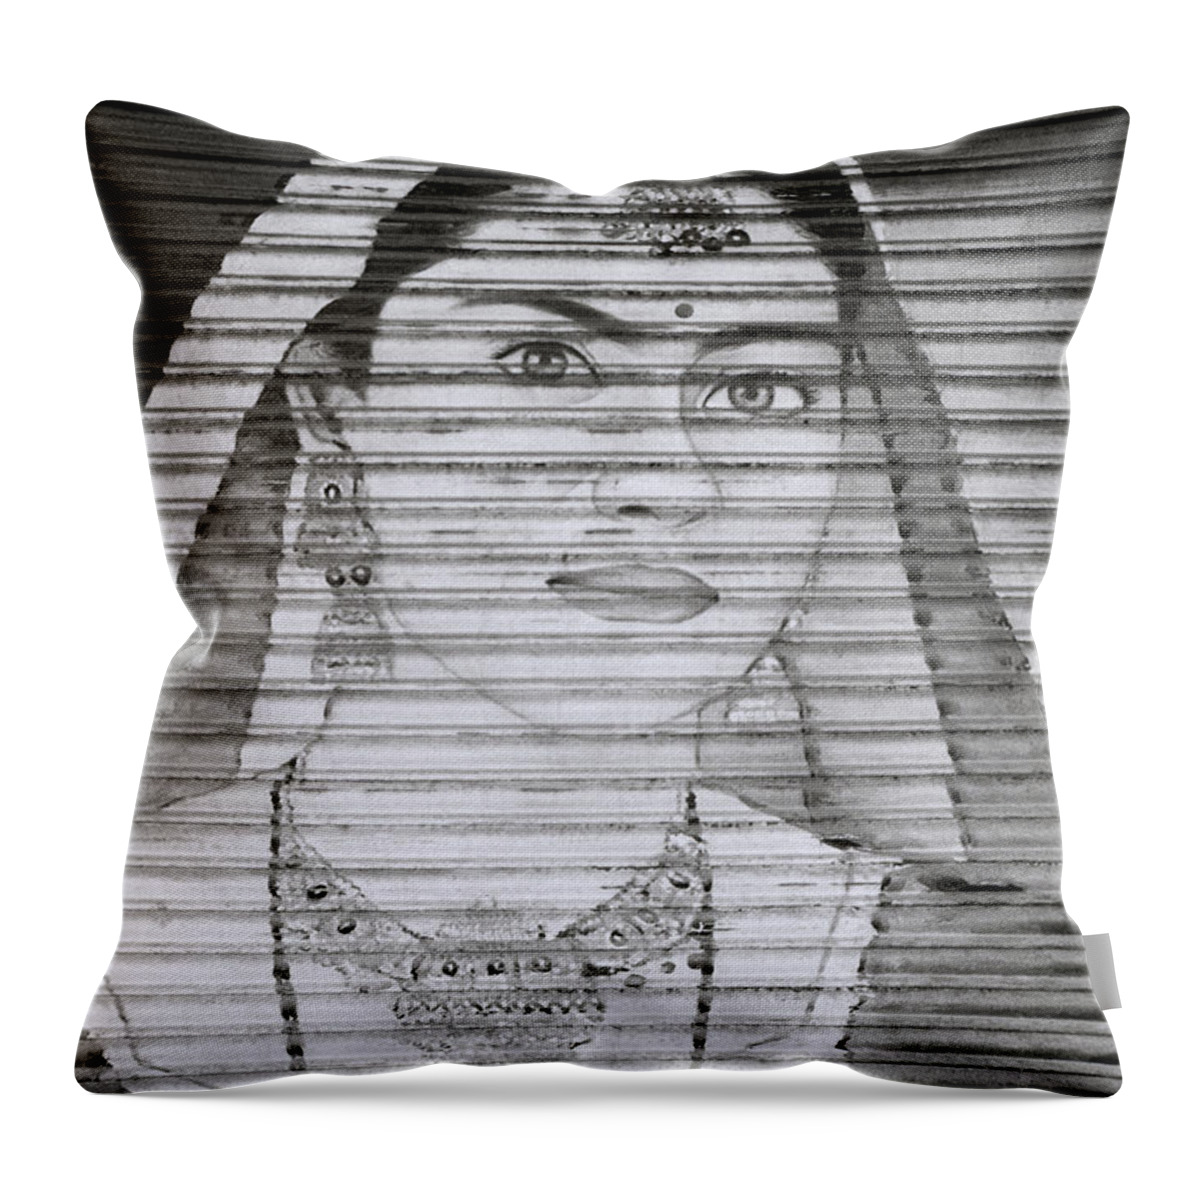 Desire Throw Pillow featuring the photograph A Beautiful Woman by Shaun Higson